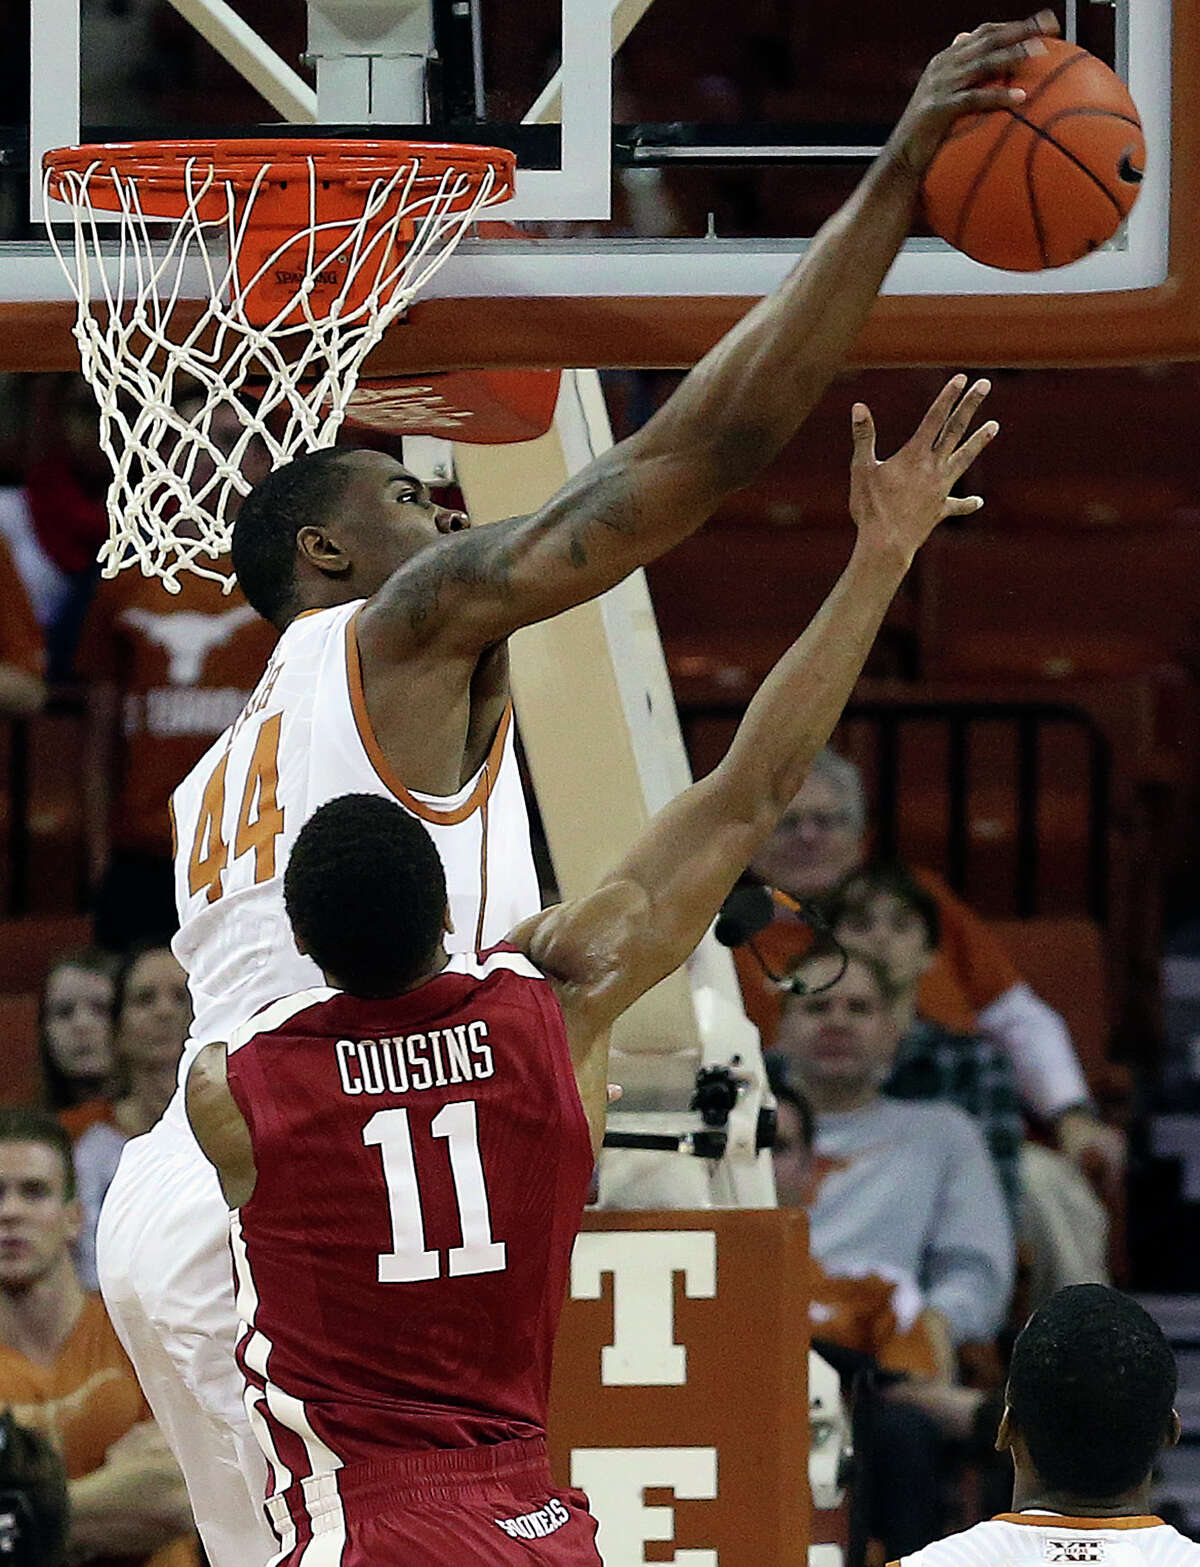 Texas center Prince Ibeh swats a shot away from Isiah Cousins as the Longhorns play Oklahoma in the Erwin Center on January 4, 2014.